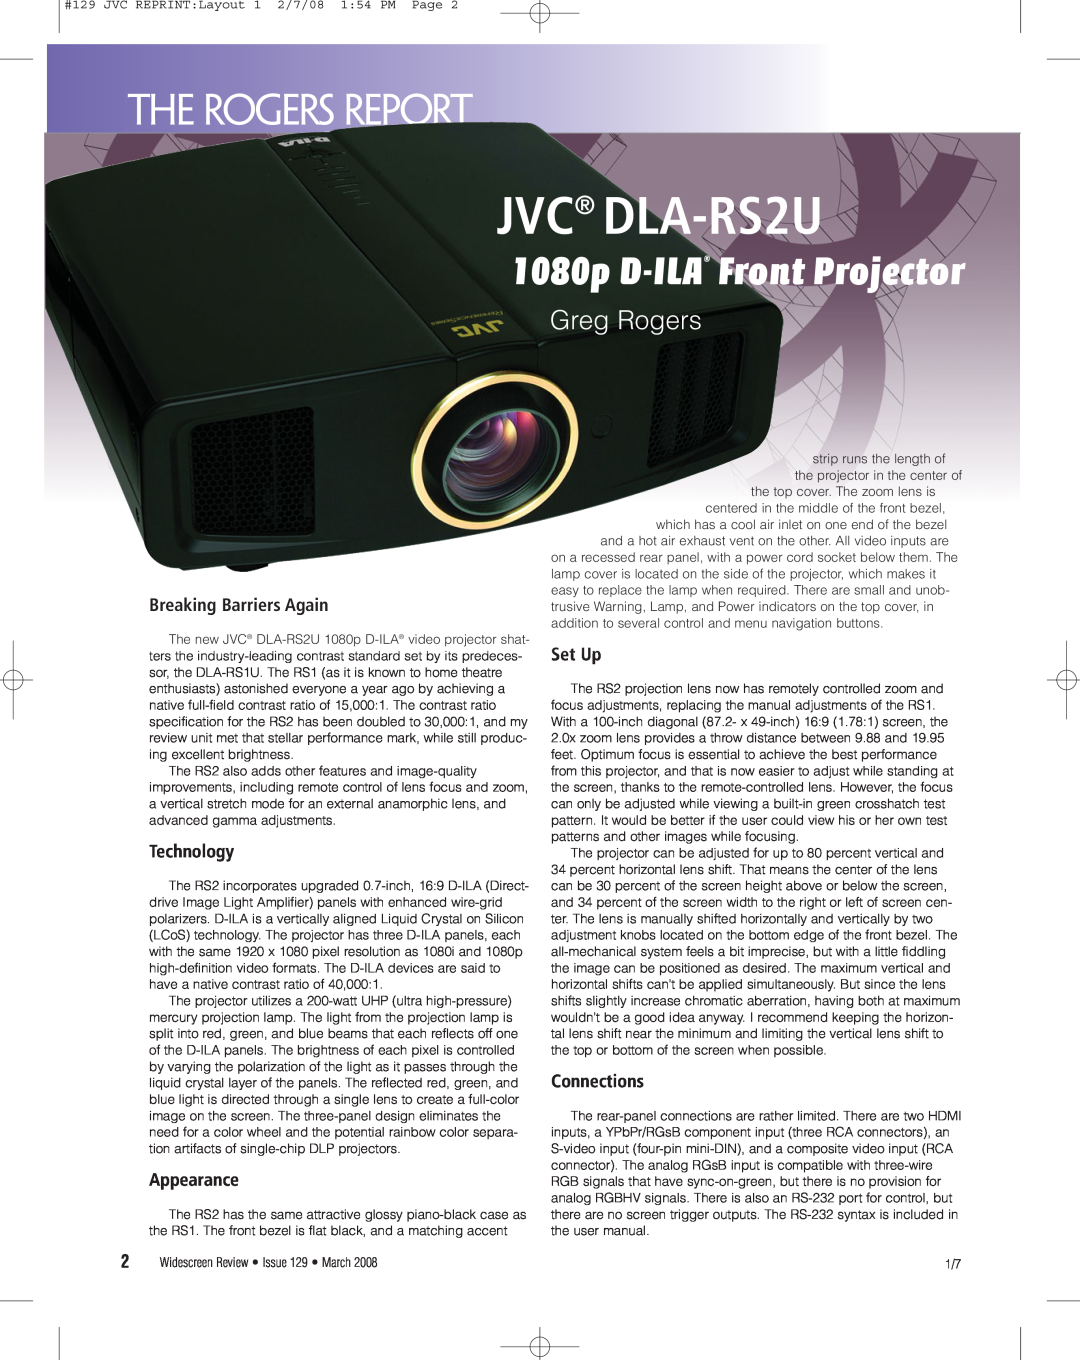 JVC D-ILA user manual Breaking Barriers Again, Technology, Appearance, Set Up, Connections, JVC DLA-RS2U, Greg Rogers 